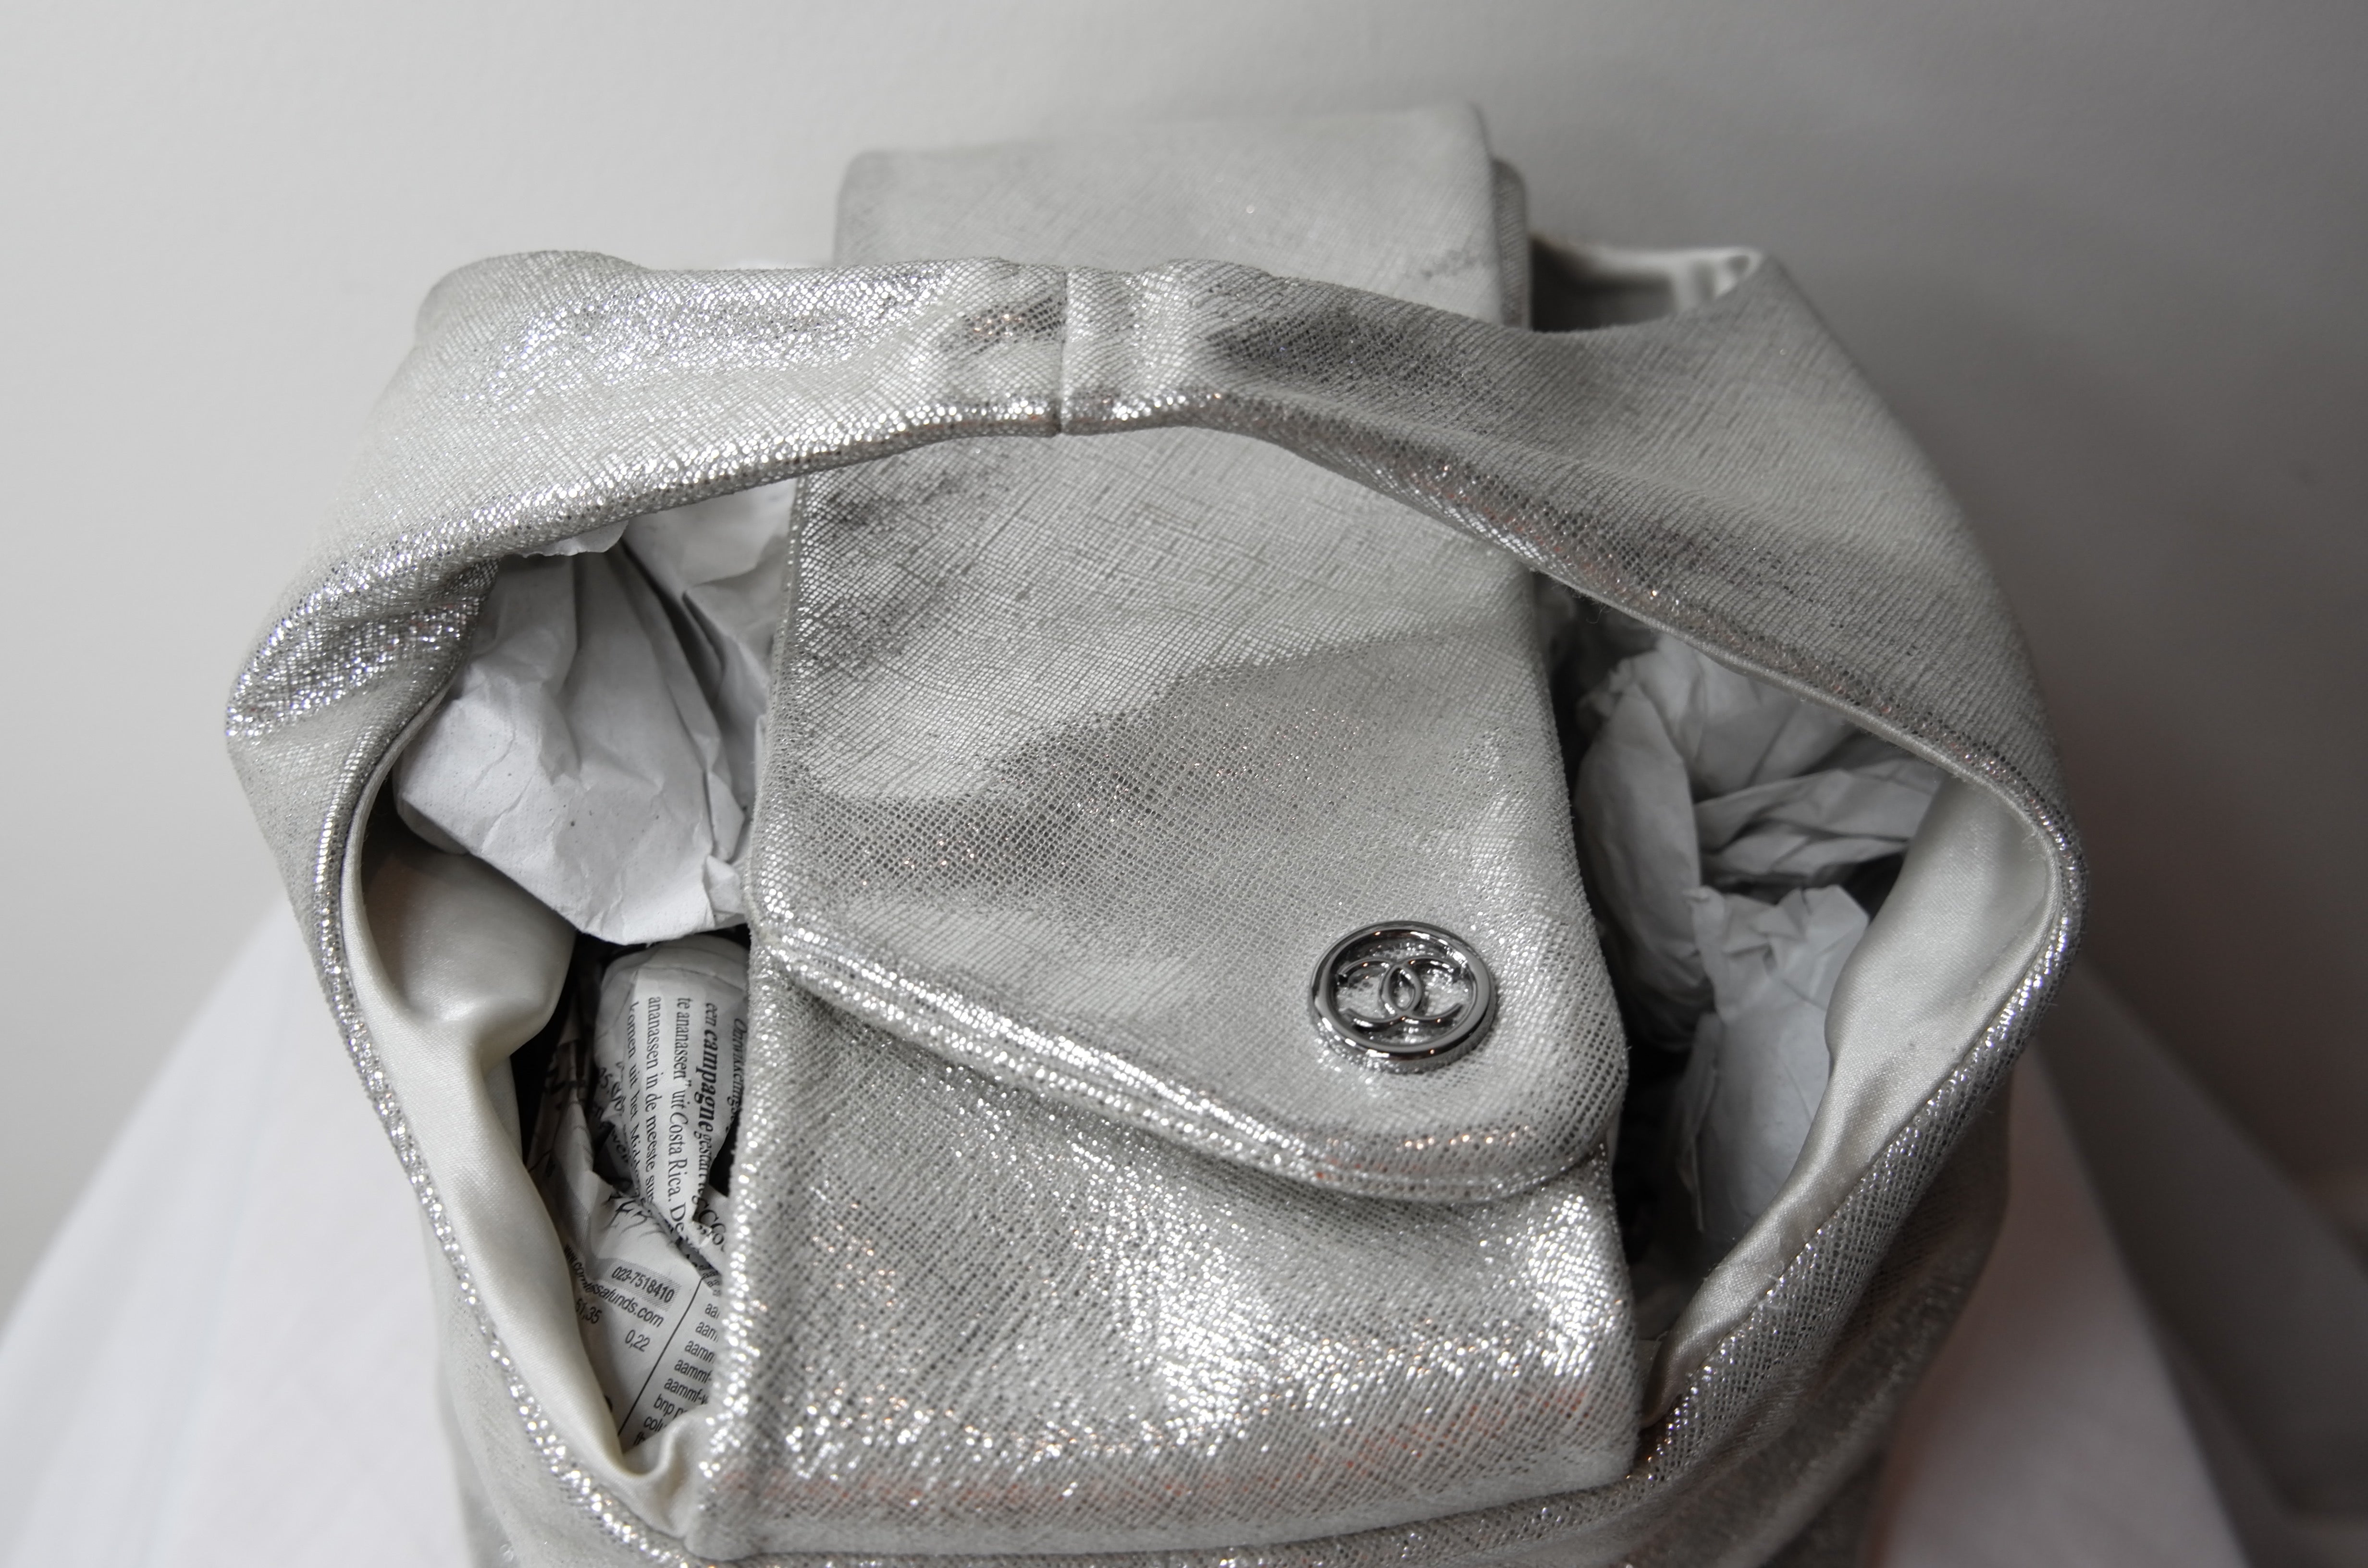 Chanel Bucket Bag in Silver Metallic Leather